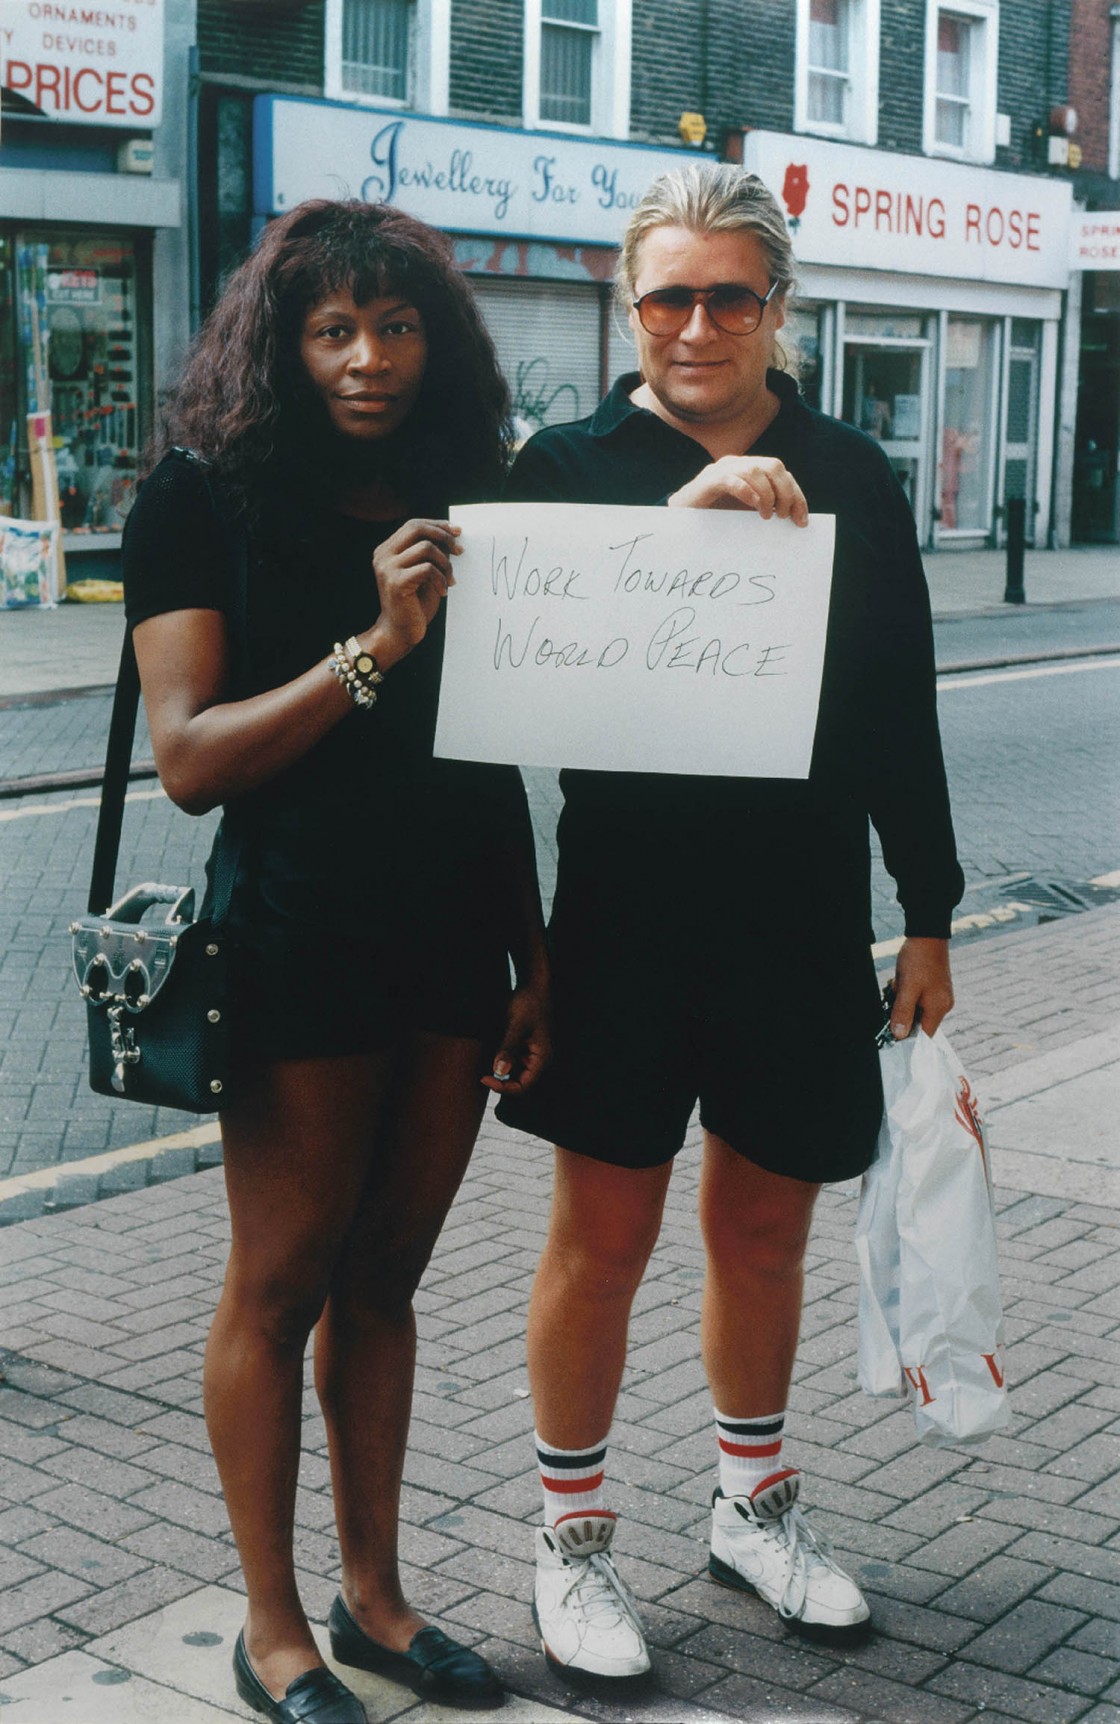 Gillian Wearing, Work Towards World Peace - Signs that&nbsp;say what you want them to say and not&nbsp;signs that say what someone else wants&nbsp;you to say,&nbsp;1992-1993&nbsp;R-type color print.